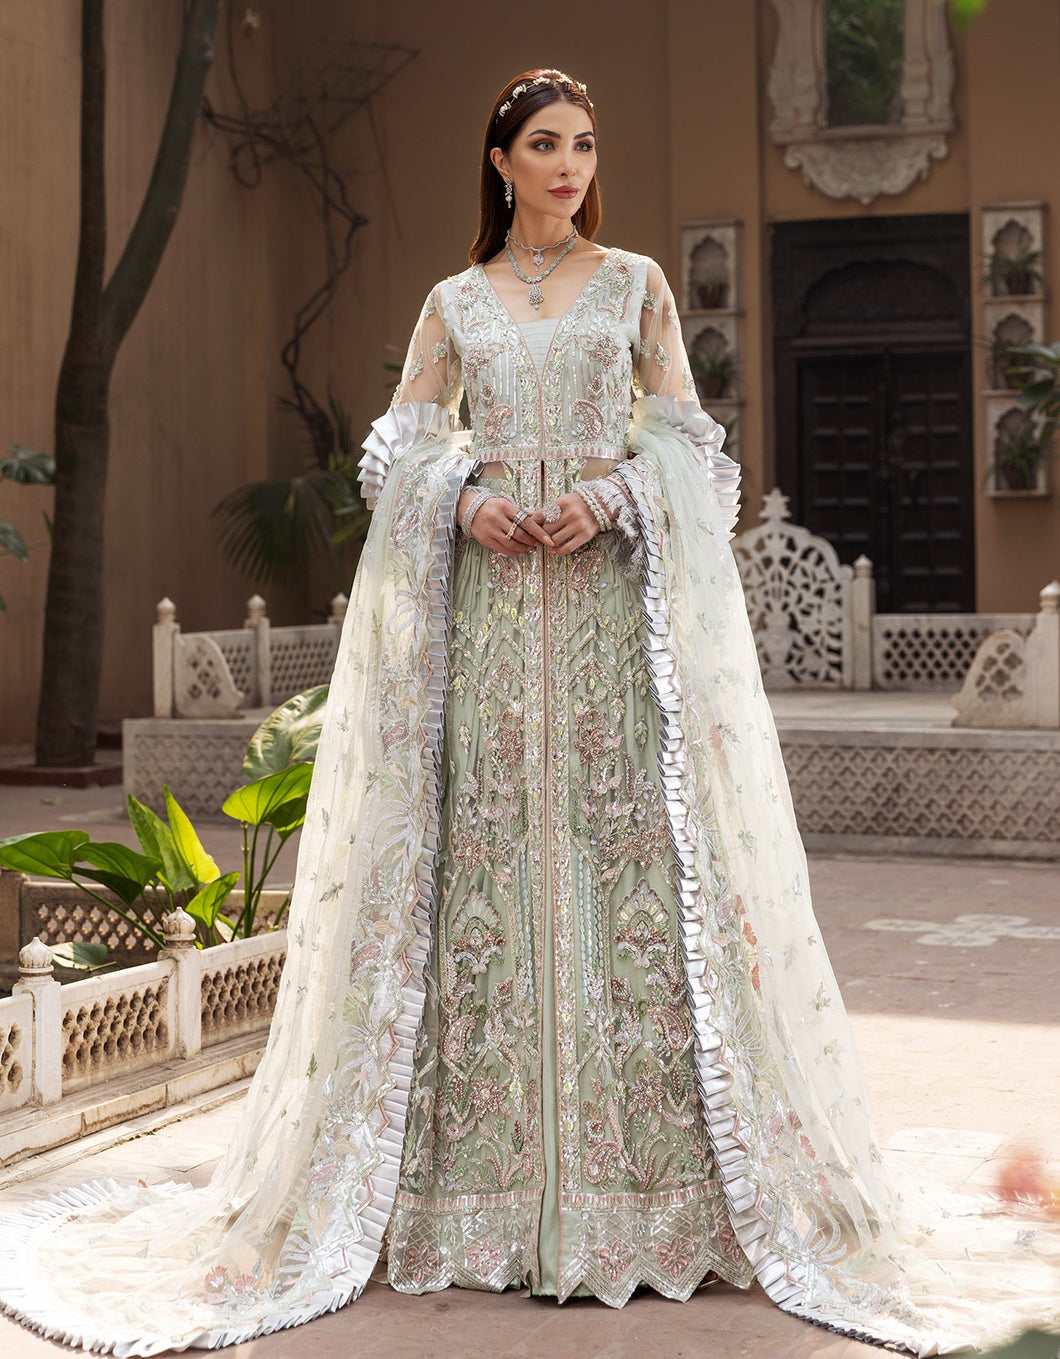 Shop EMAAN ADEEL MAHERMA BRIDAL VOL 2 2022 | MB-203 at @lebaasonline Net Embroidered hand mirror work, New Indian Wedding dresses online USA & Pakistani Designer Partywear Suits in the UK and USA at LebaasOnline. Browse new EMAAN ADEEL - MAHERMAH 2022 Green Pakistani Bridal Dress & Nikah dresses SALE at LebaasOnline.